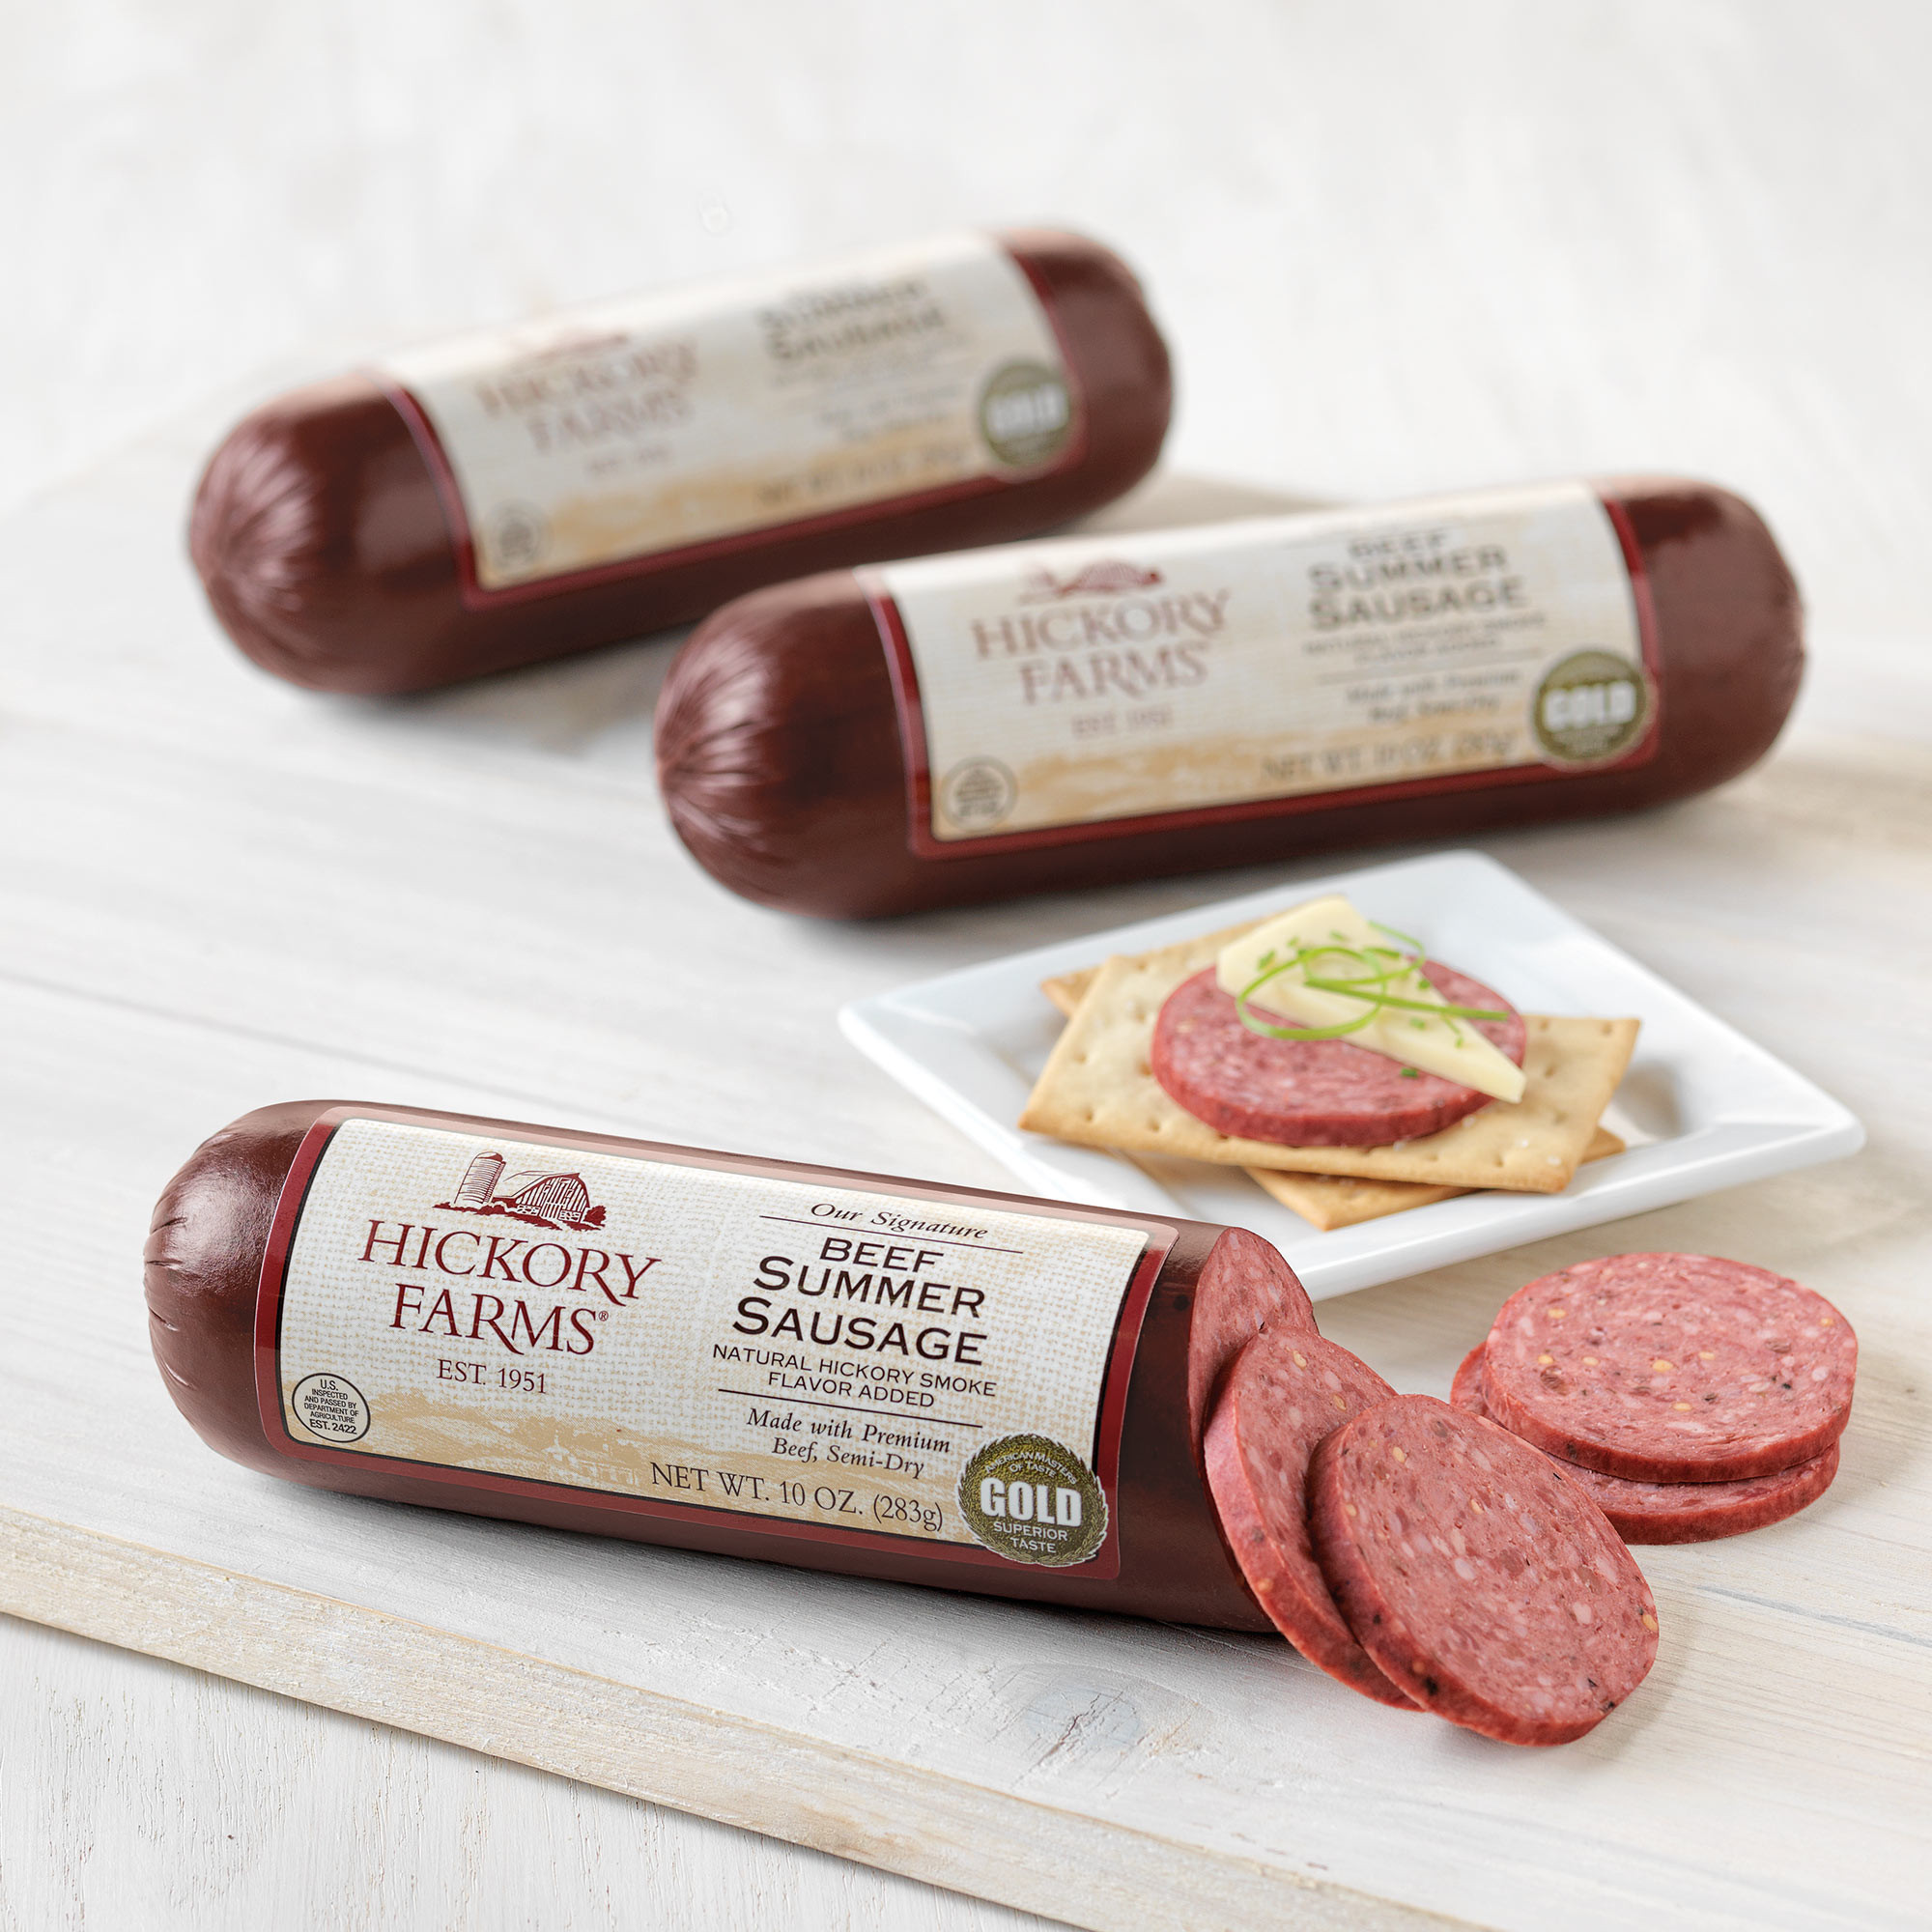 Hickory Farms Beef Summer Sausage
 Hickory Farms Signature Beef Summer Sausage